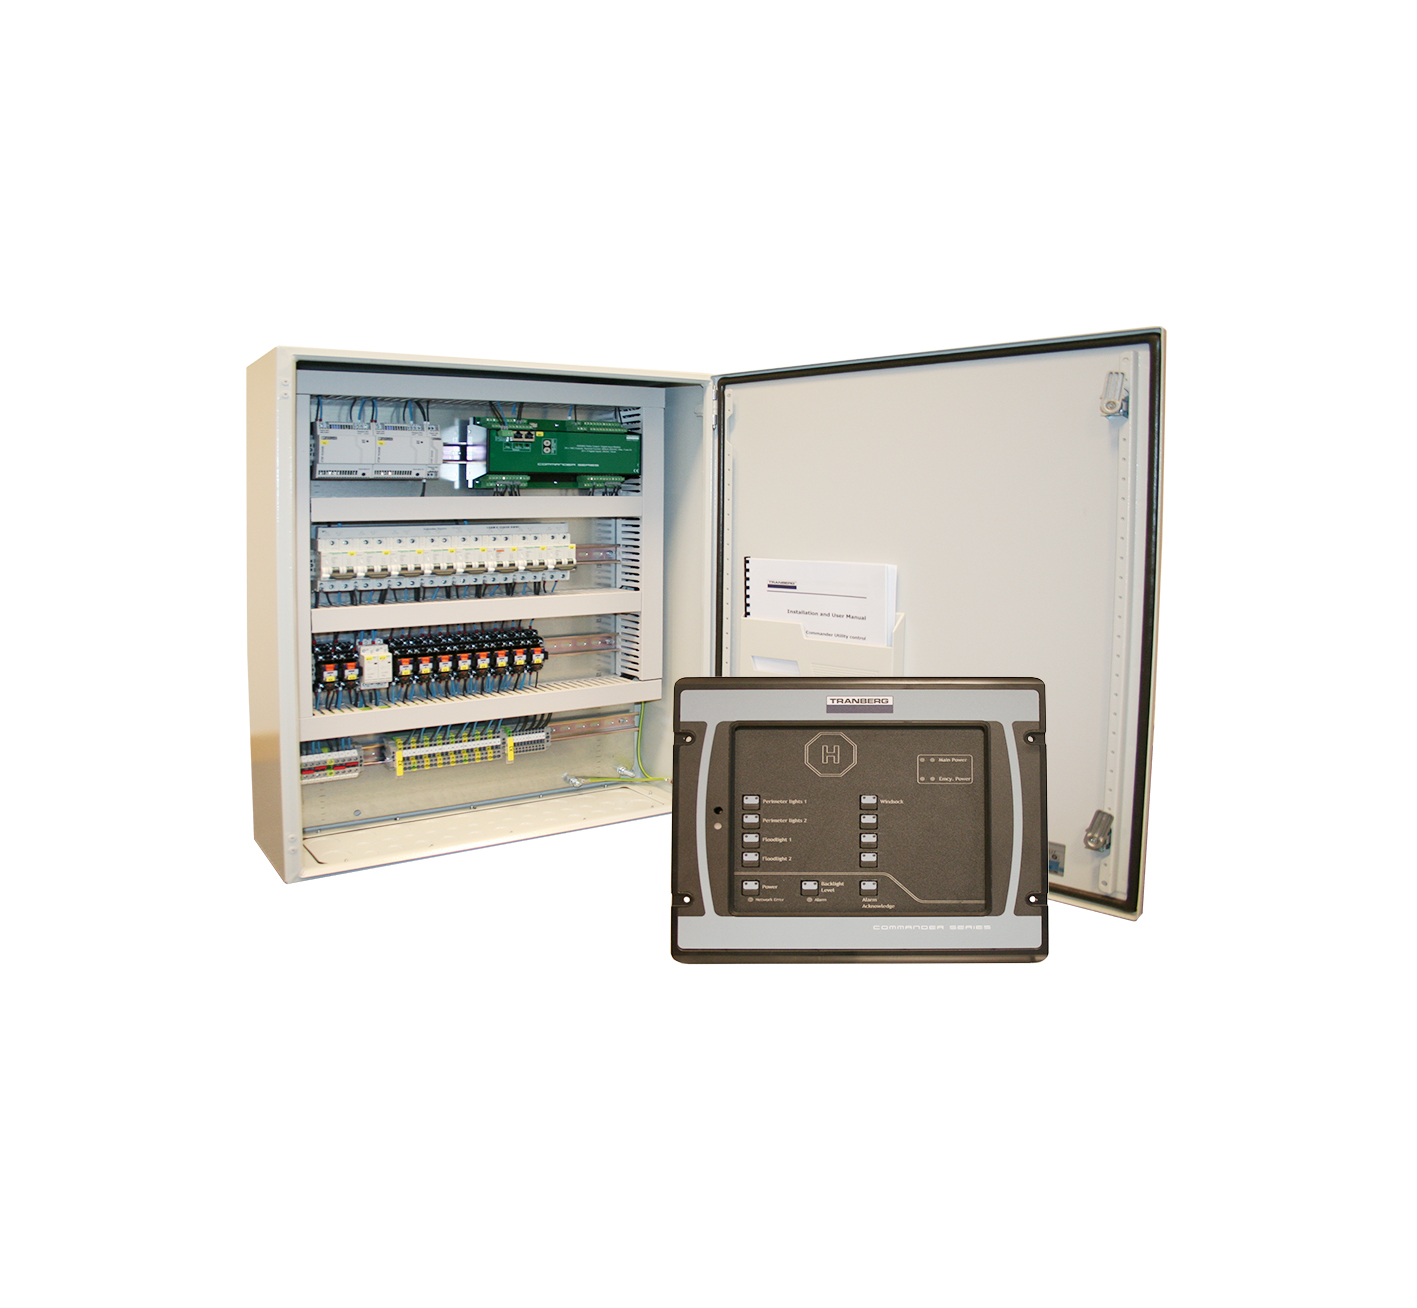 TEF 4500: Helideck lights control system, 8 circuits 220-240 VAC 50/60Hz, B10 A circuit breakers. photo